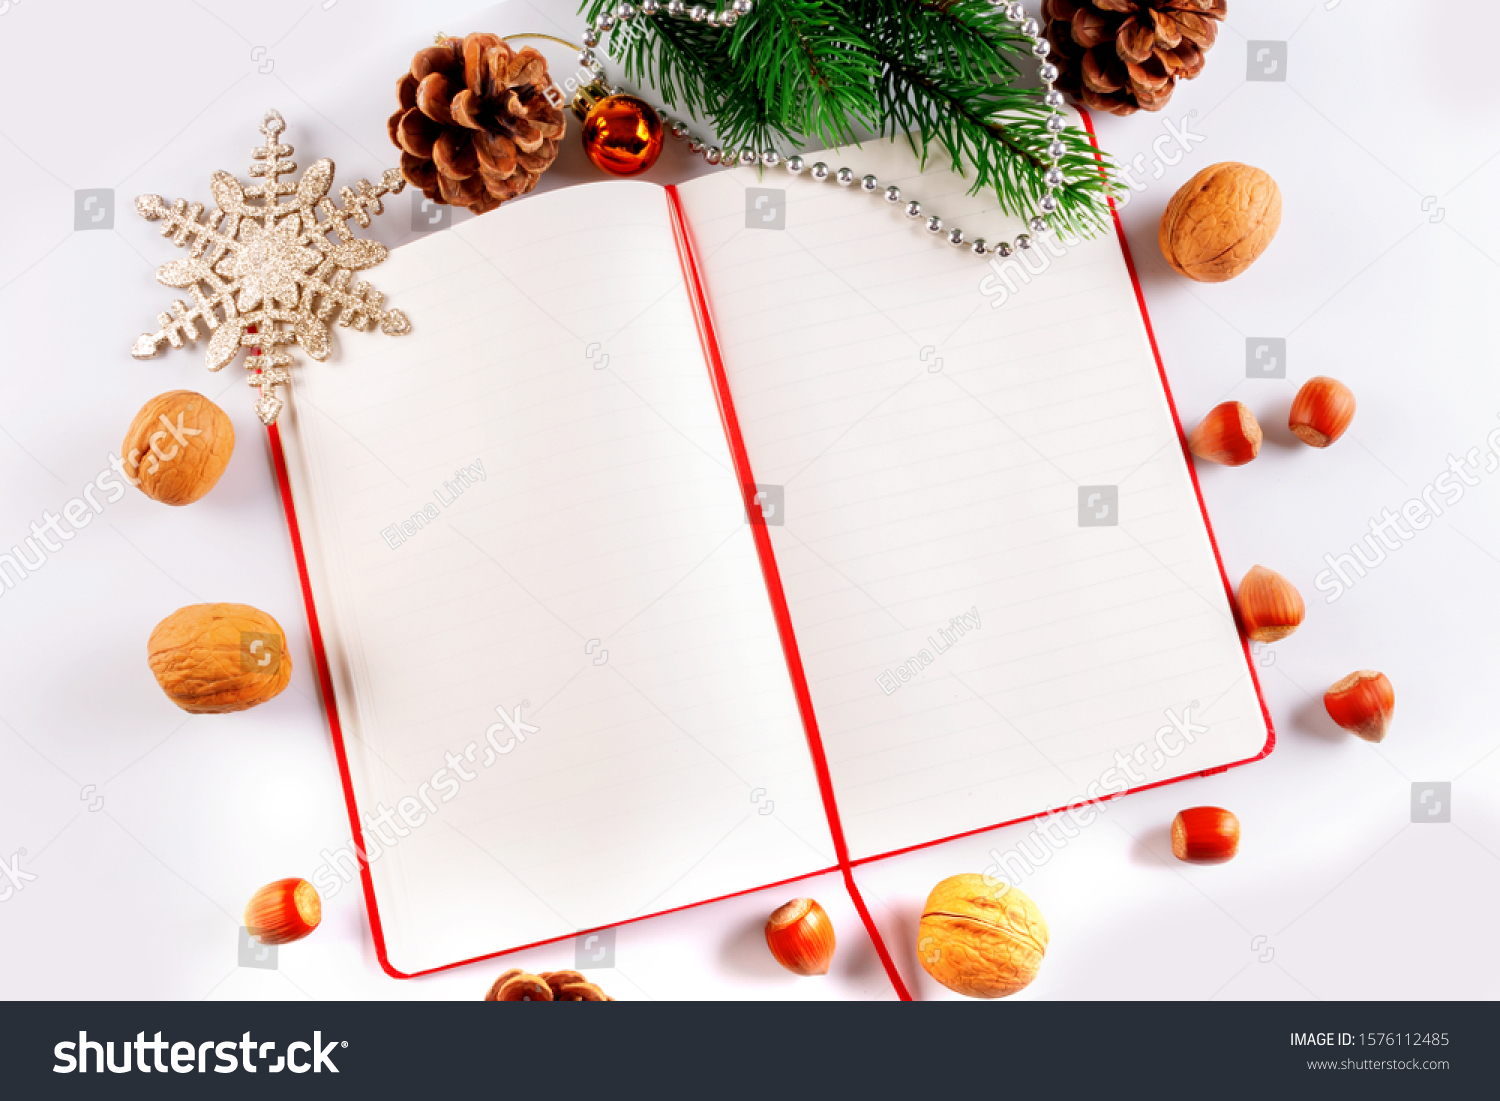 Christmas card with Christmas decorations and a diary with copy space for writing wishes #1576112485